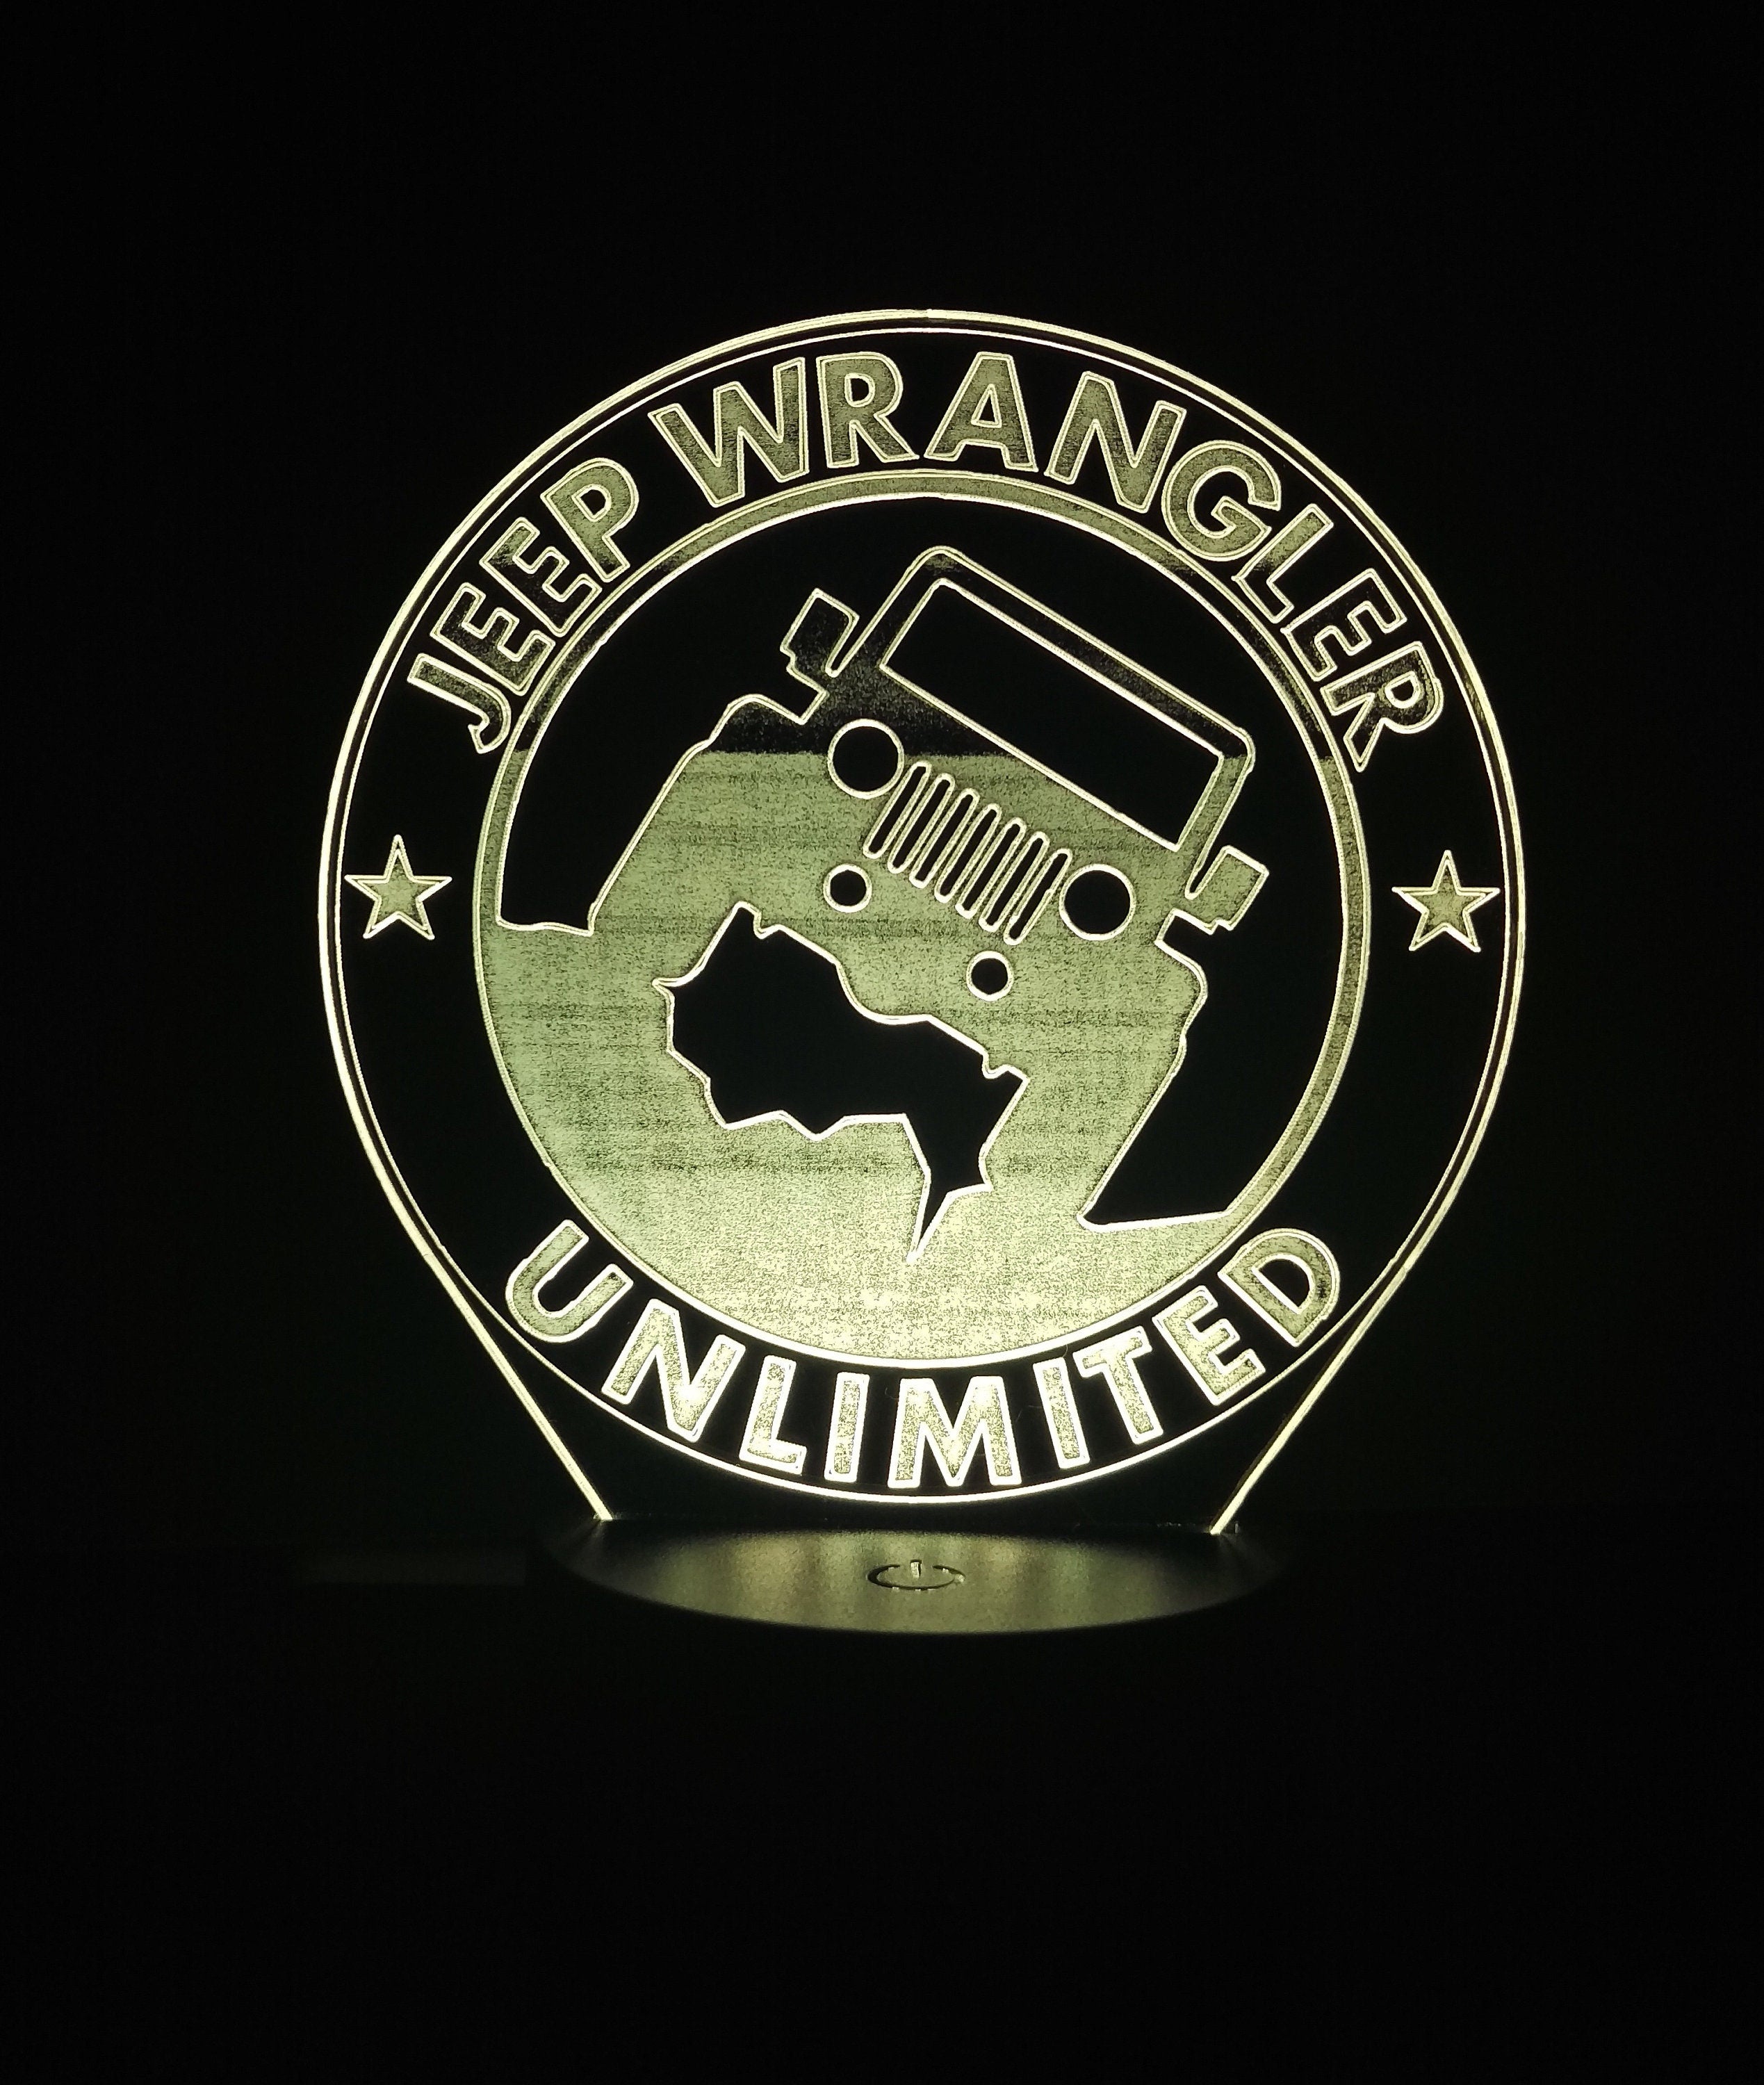 Awesome "Jeep Wrangler - Unlimited" LED lamp (1105) - FREE SHIPPING!